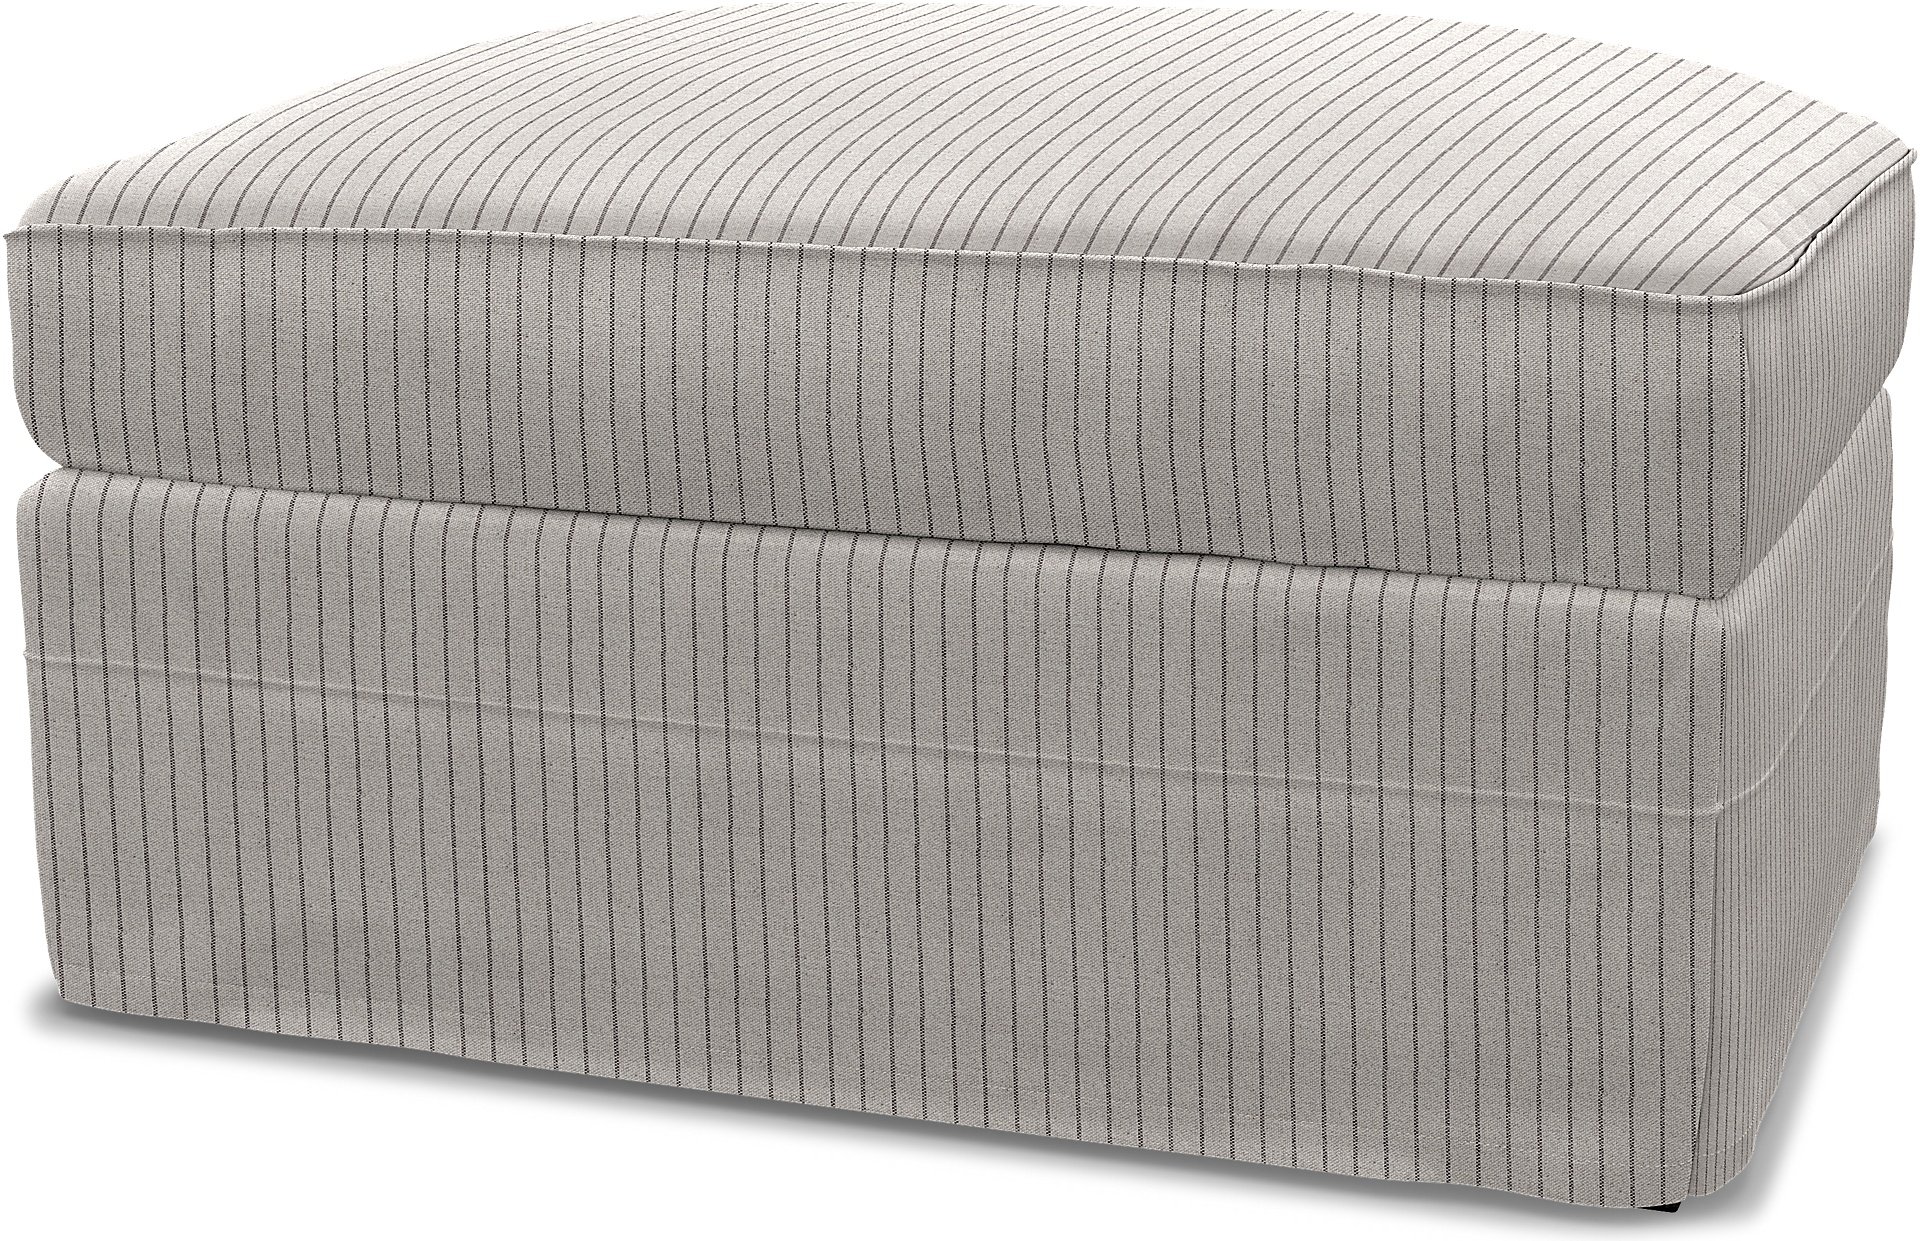 IKEA - Gronlid Footstool with Storage Cover, Silver Grey, Cotton - Bemz